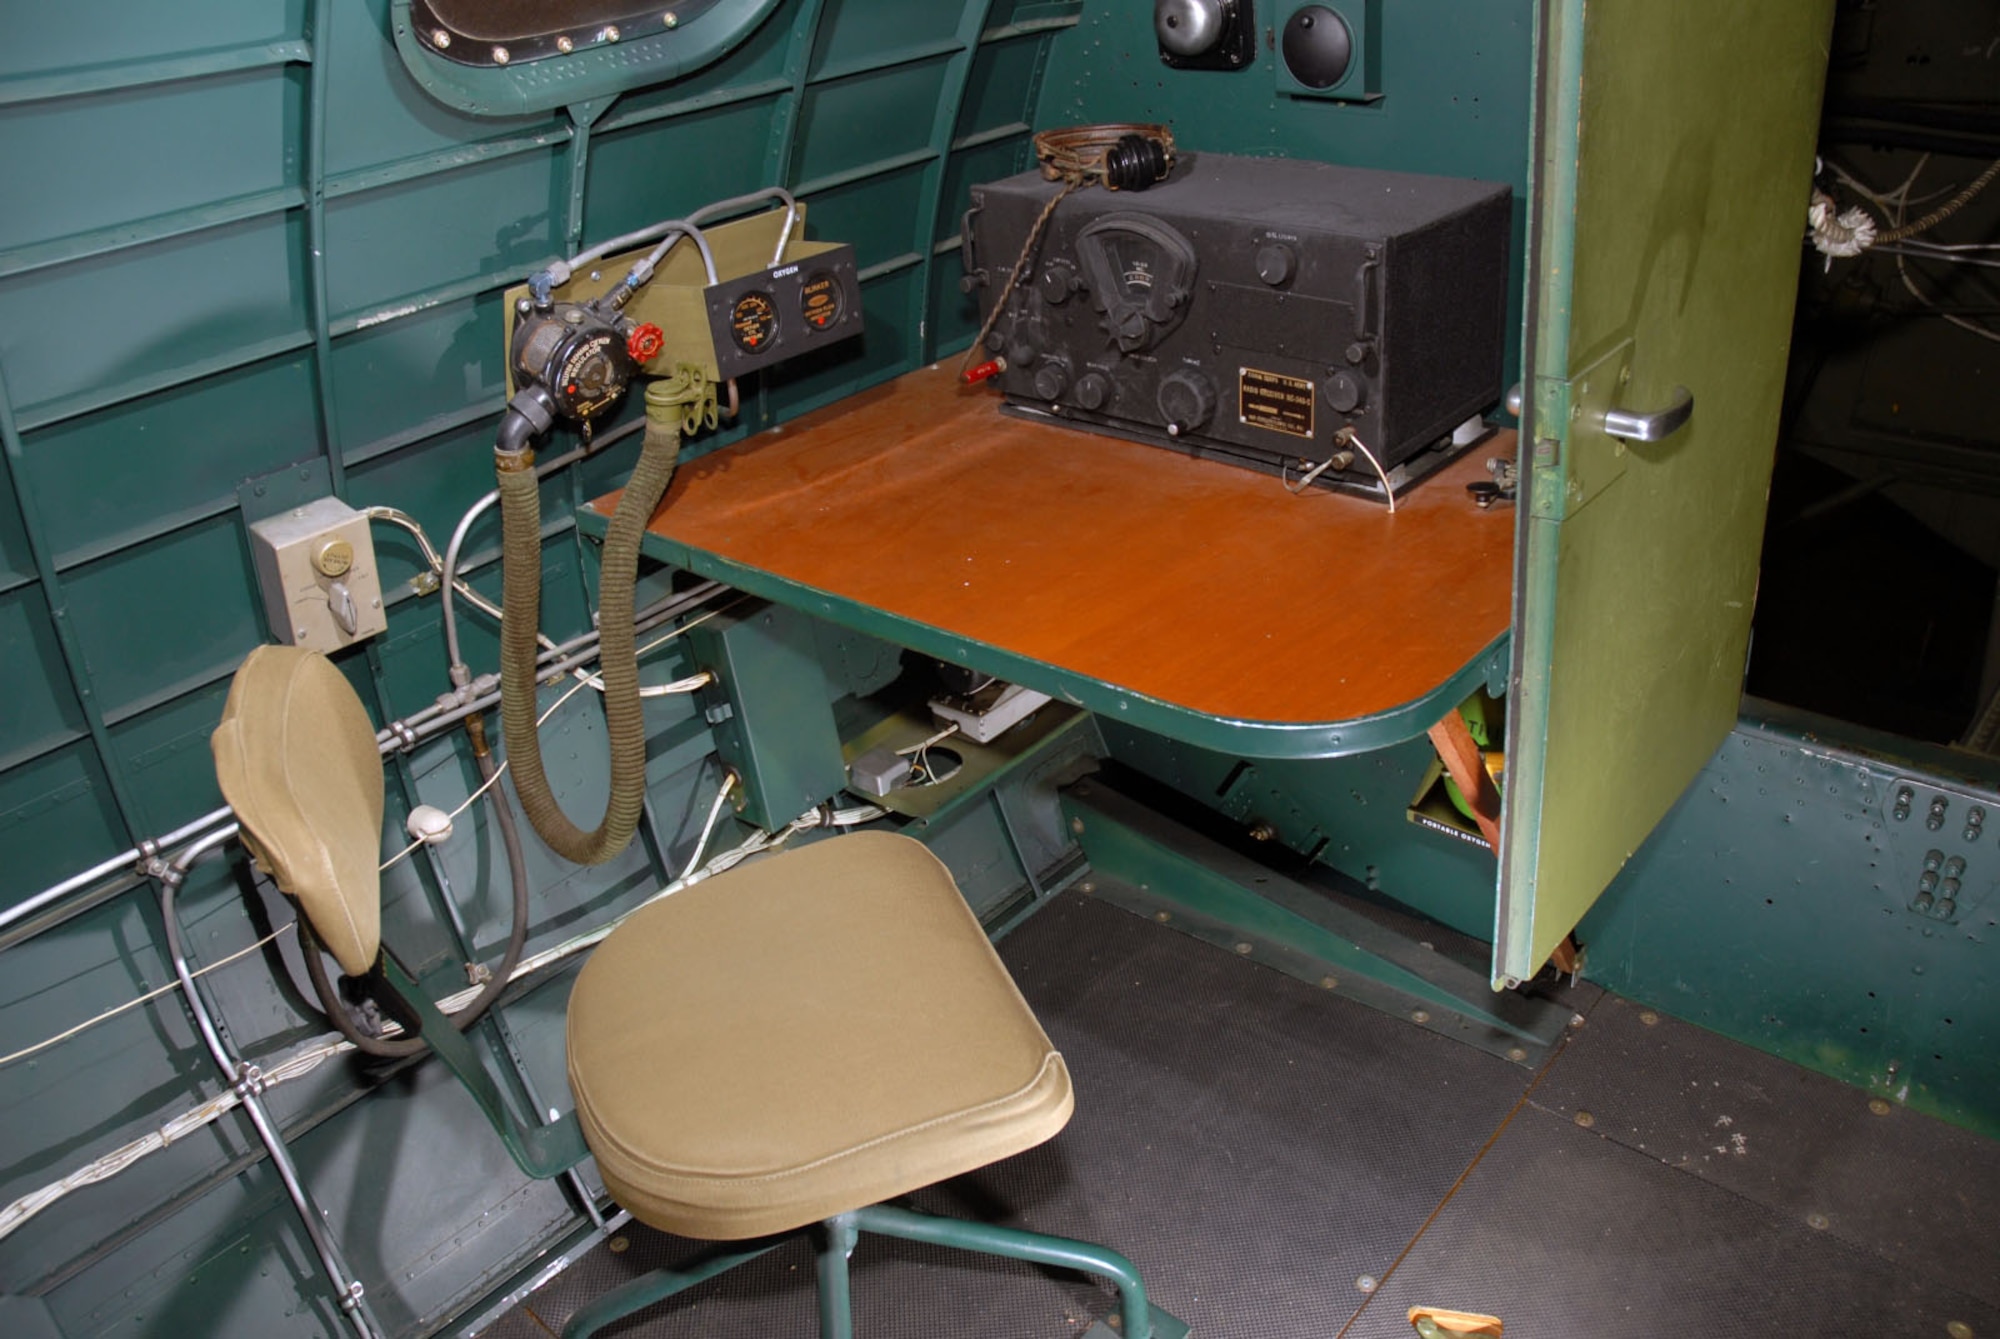 DAYTON, Ohio -- Interior of the Boeing B-17G "Shoo Shoo Shoo Baby" at the National Museum of the United States Air Force. (U.S. Air Force photo)